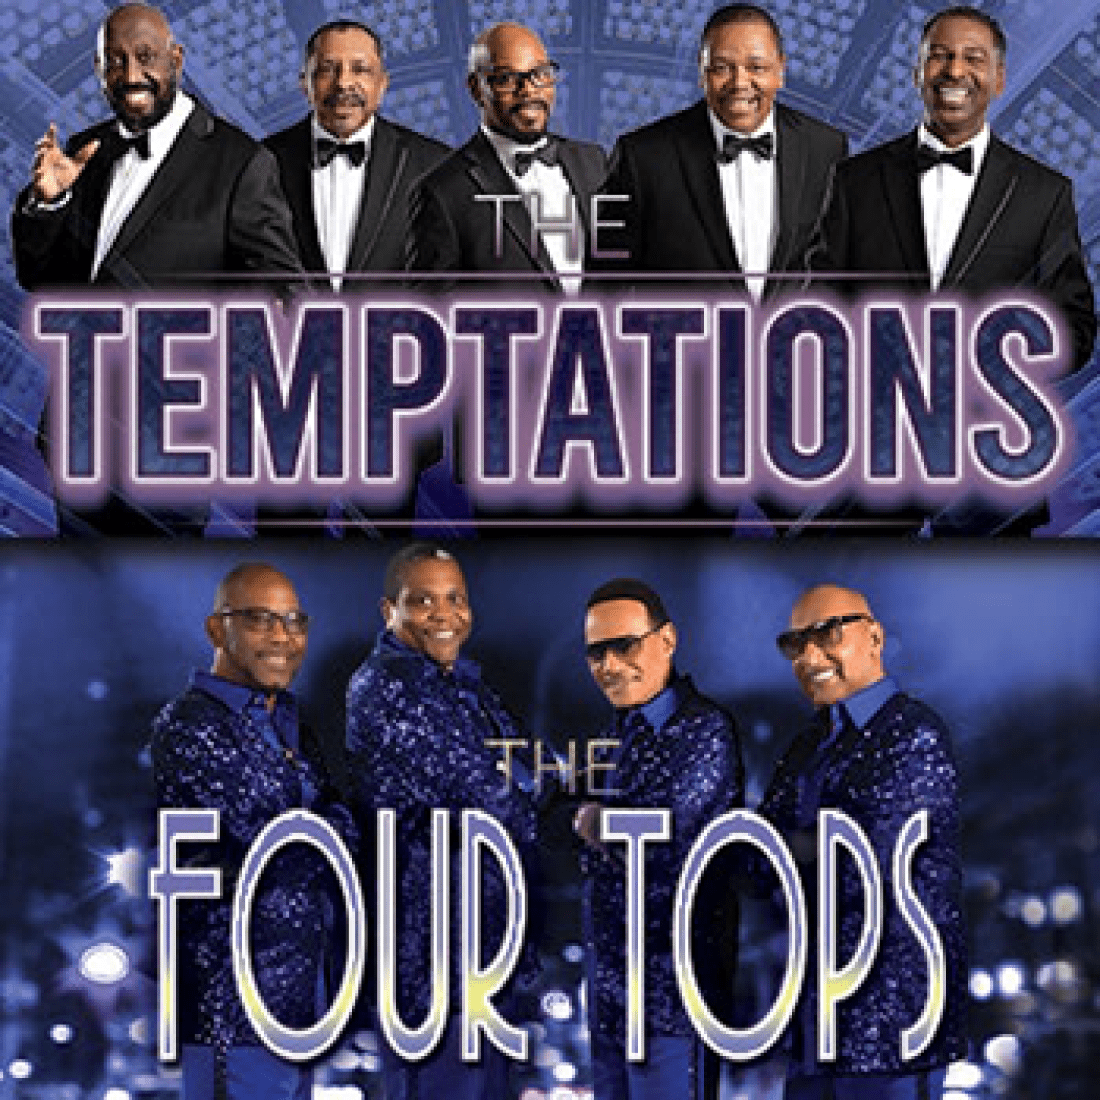 The Temptations and Four Tops bands